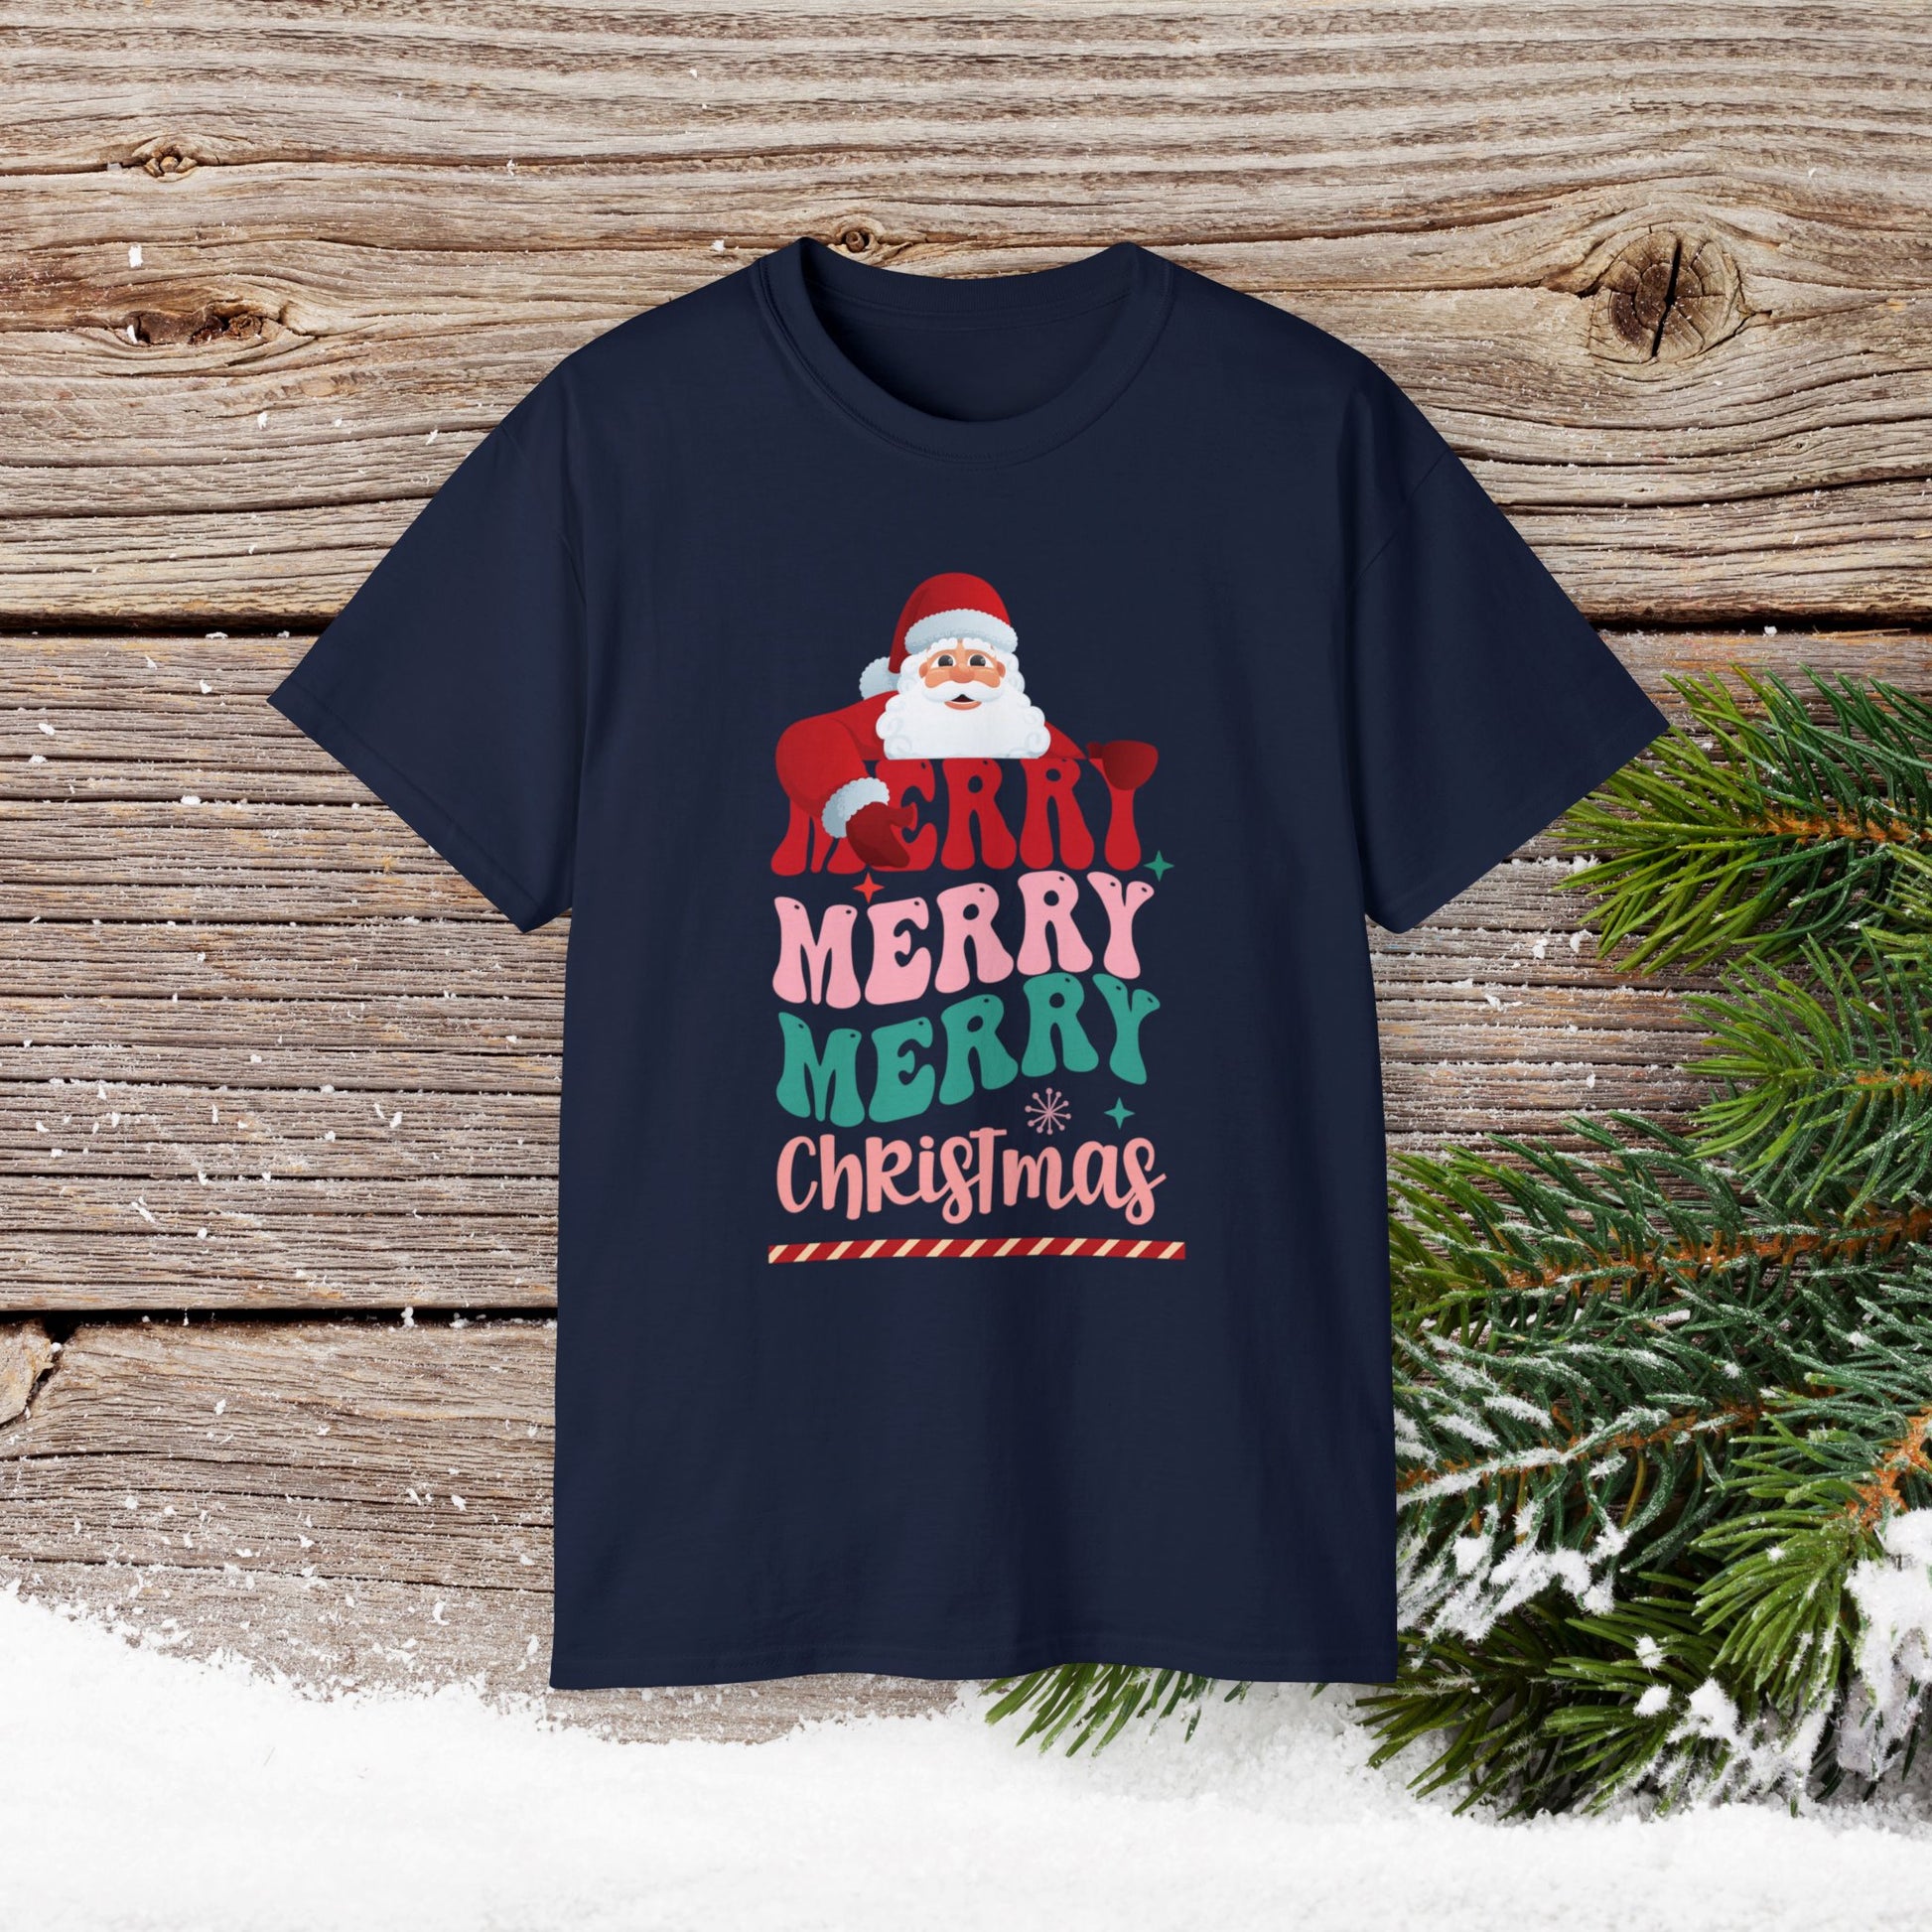 Christmas T-Shirt - Merry Merry Merry Christmas - Cute Christmas Shirts - Youth and Adult Christmas TShirts T-Shirts Graphic Avenue Navy Adult Small 